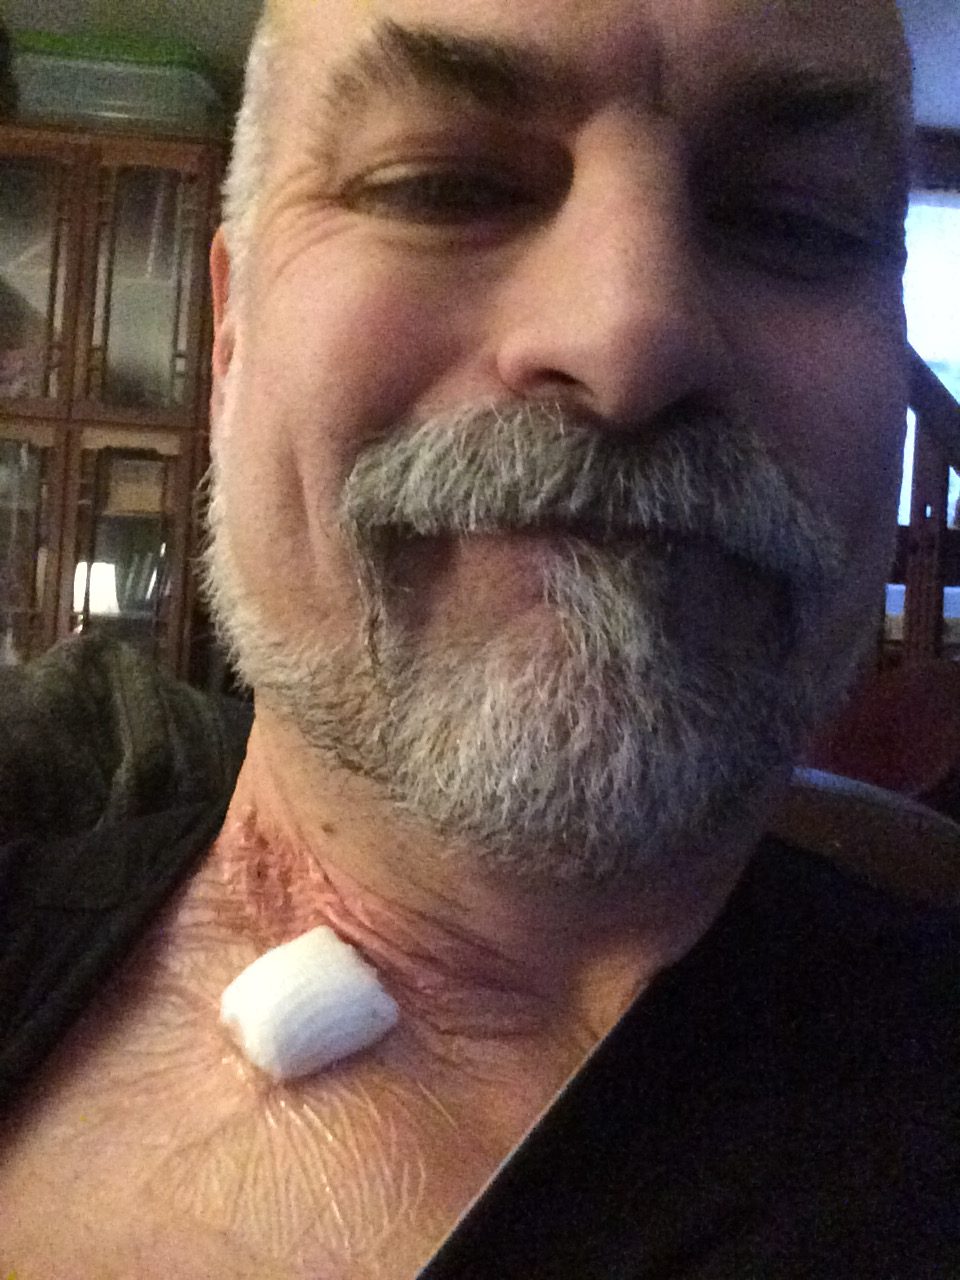 That's a little cotton pad and a big sheet of plastic stuck to my neck.  Over a HOLE THEY PUNCHED IN ME.  I'm not complaining.  Old style surgery involved scars and ^%&$.